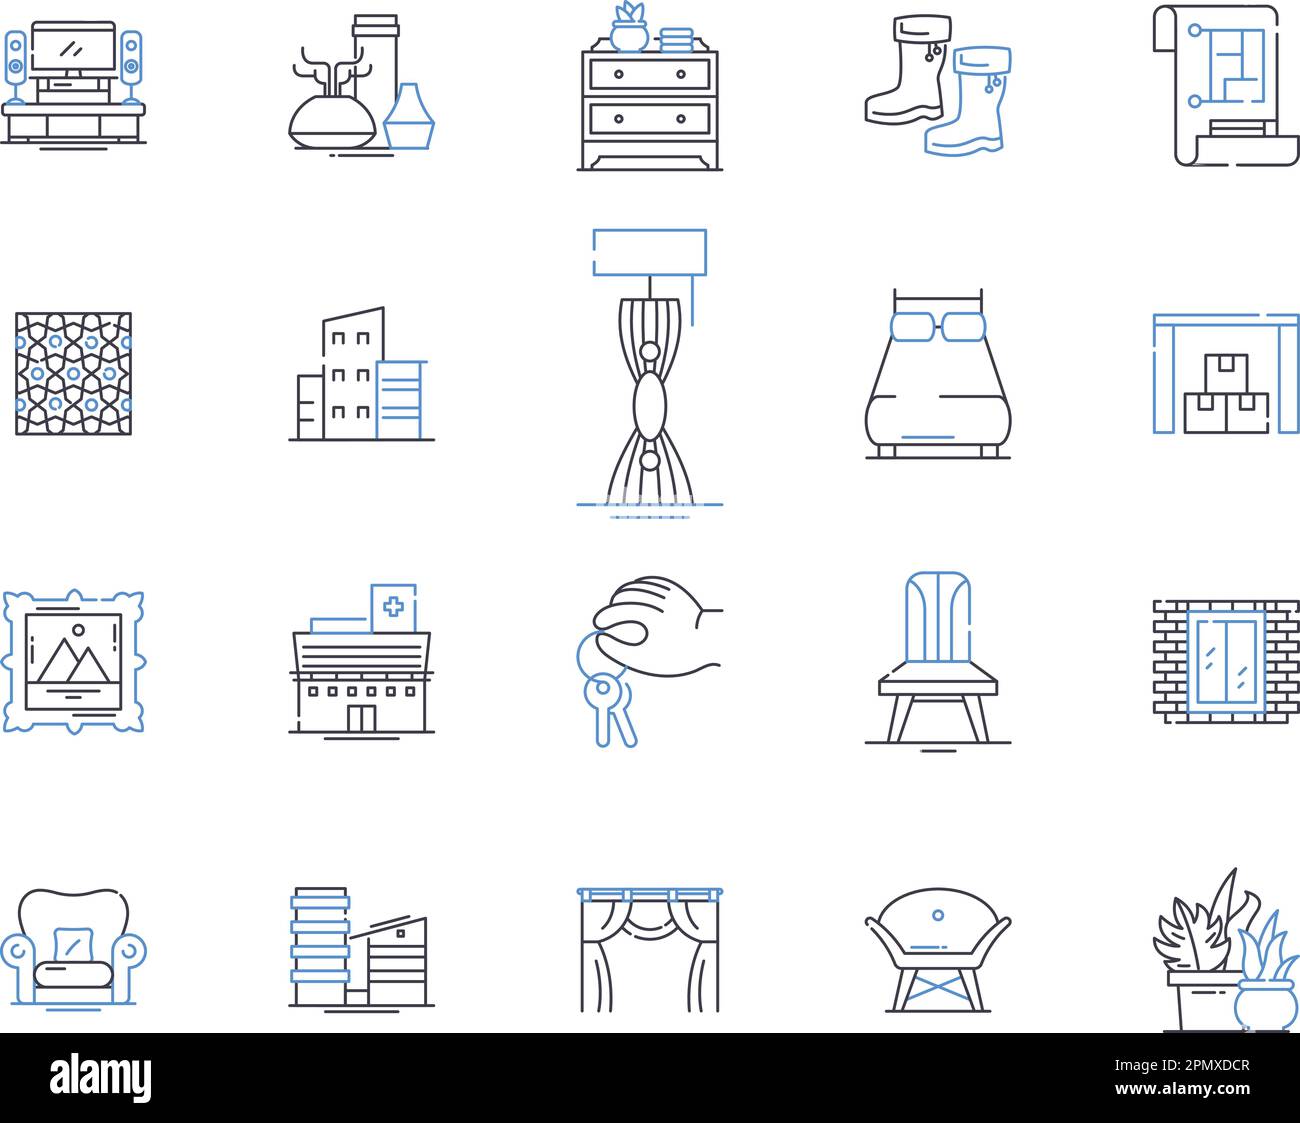 Furniture and interior outline icons collection. Furniture, Interior, Decor, Sofa, Table, Chair, Design vector and illustration concept set. Couch Stock Vector